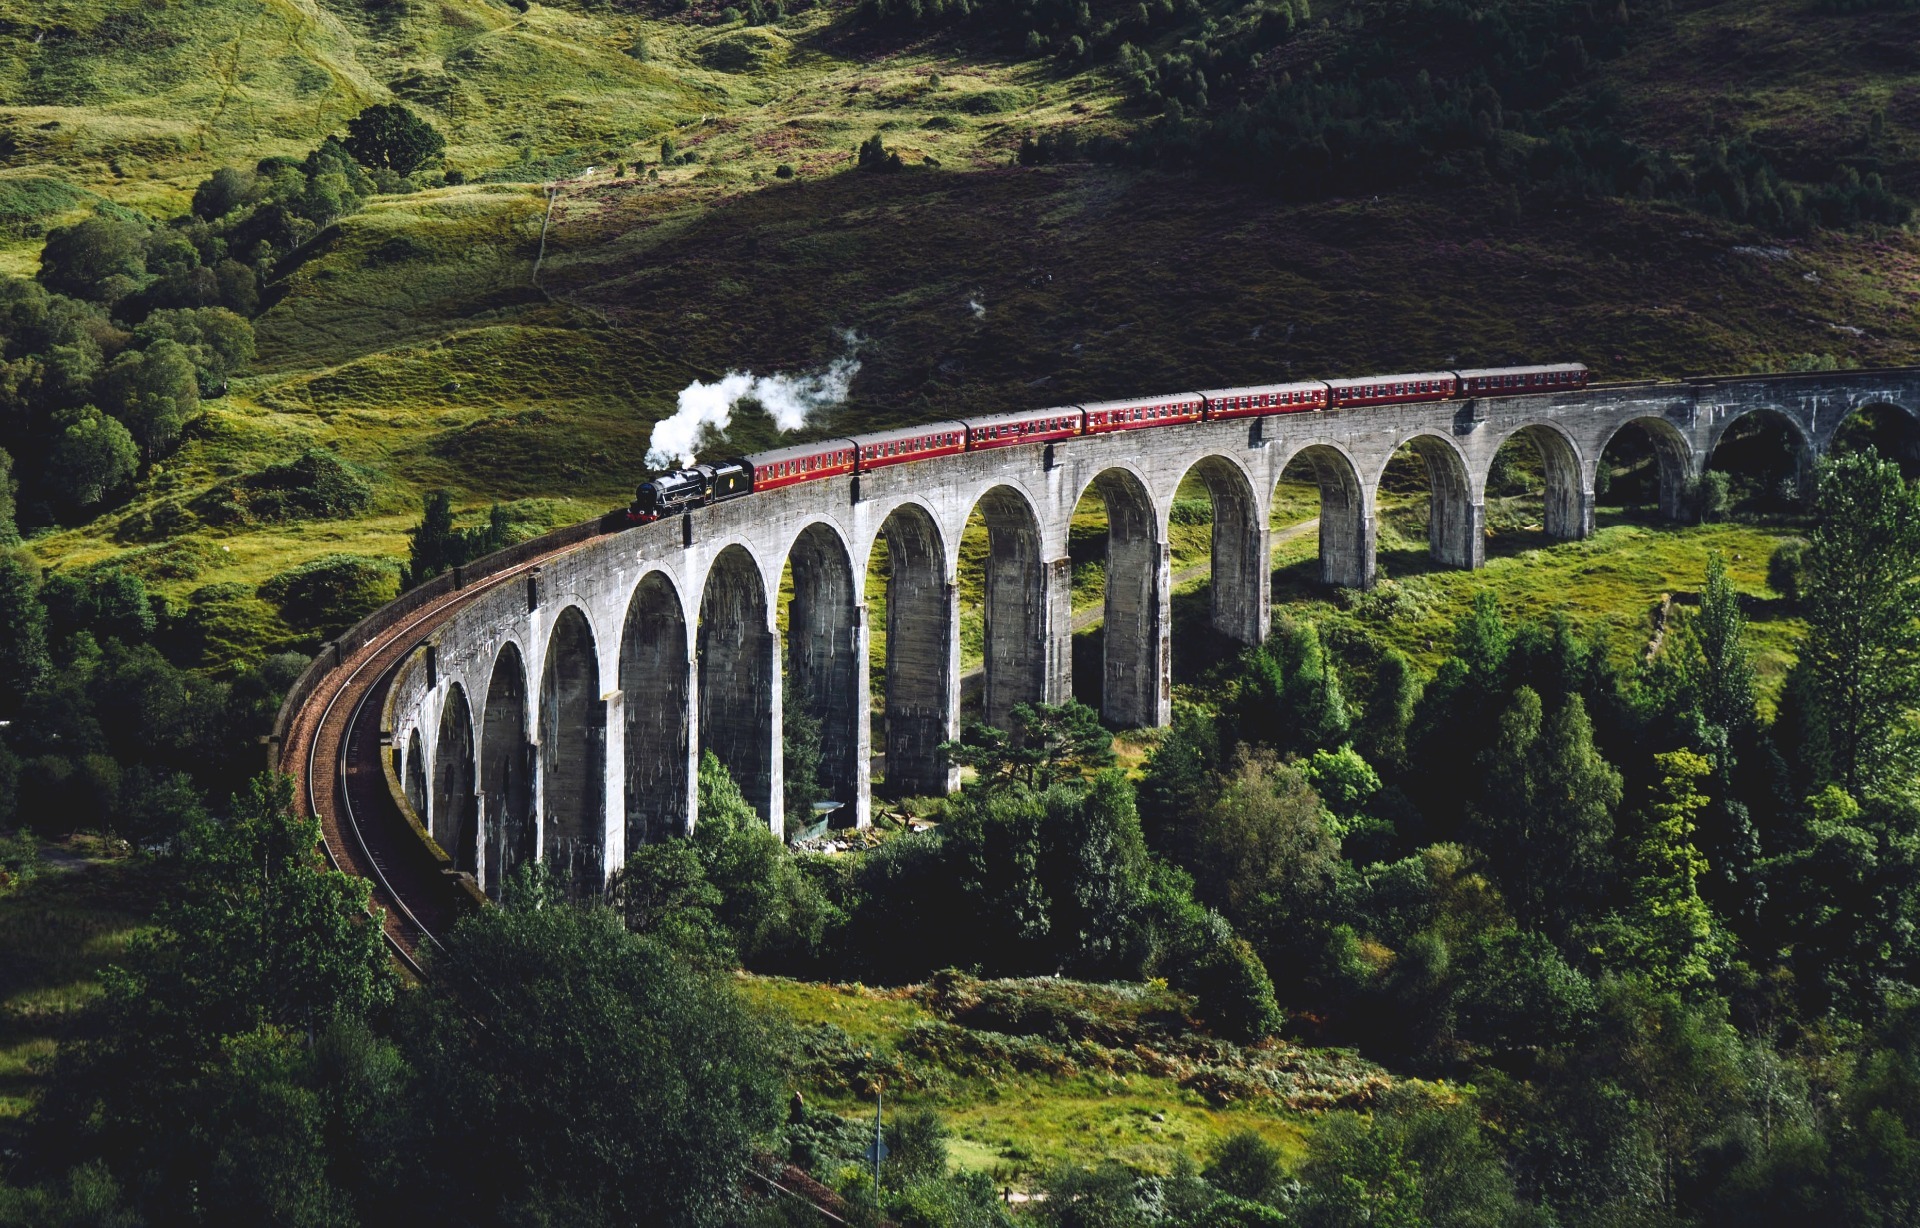 Harry Potter places to visit and film locations